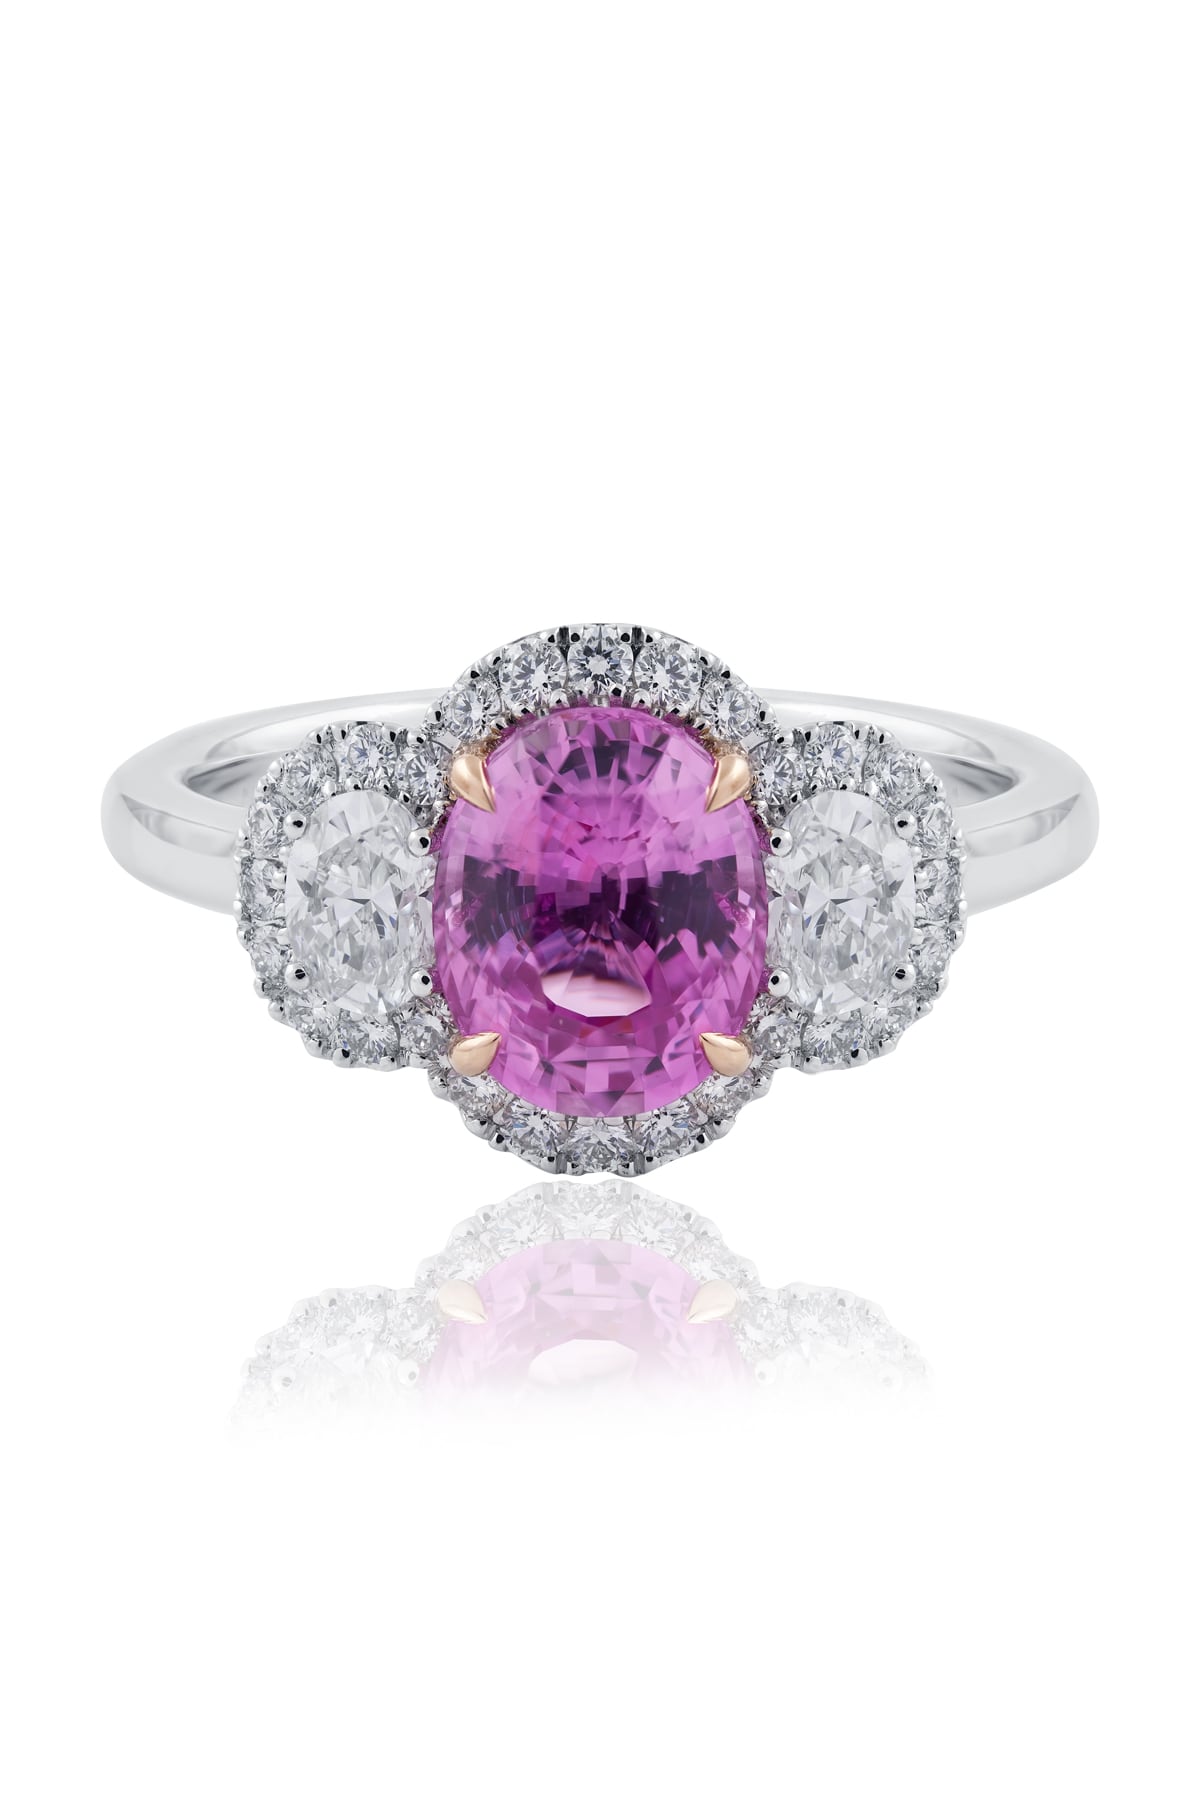 Natural Oval Pink Sapphire & Diamond Ring from LeGassick Jewellery Gold Coast.